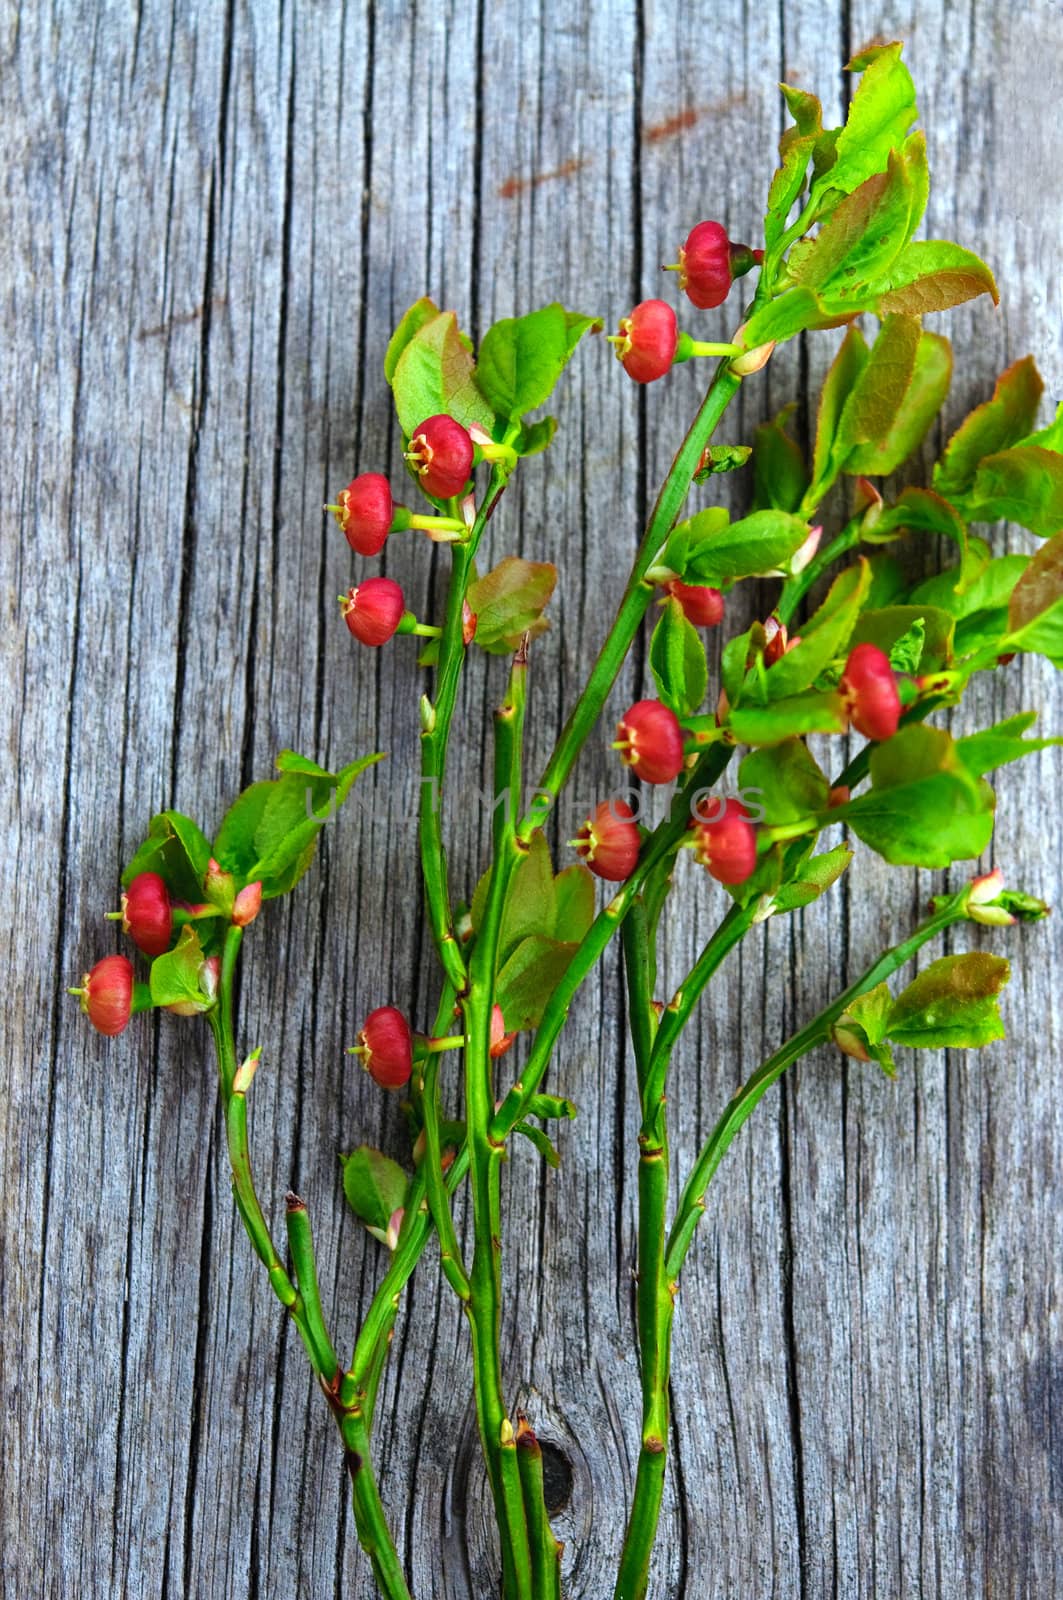 A branch of pink blueberry flowers on wood